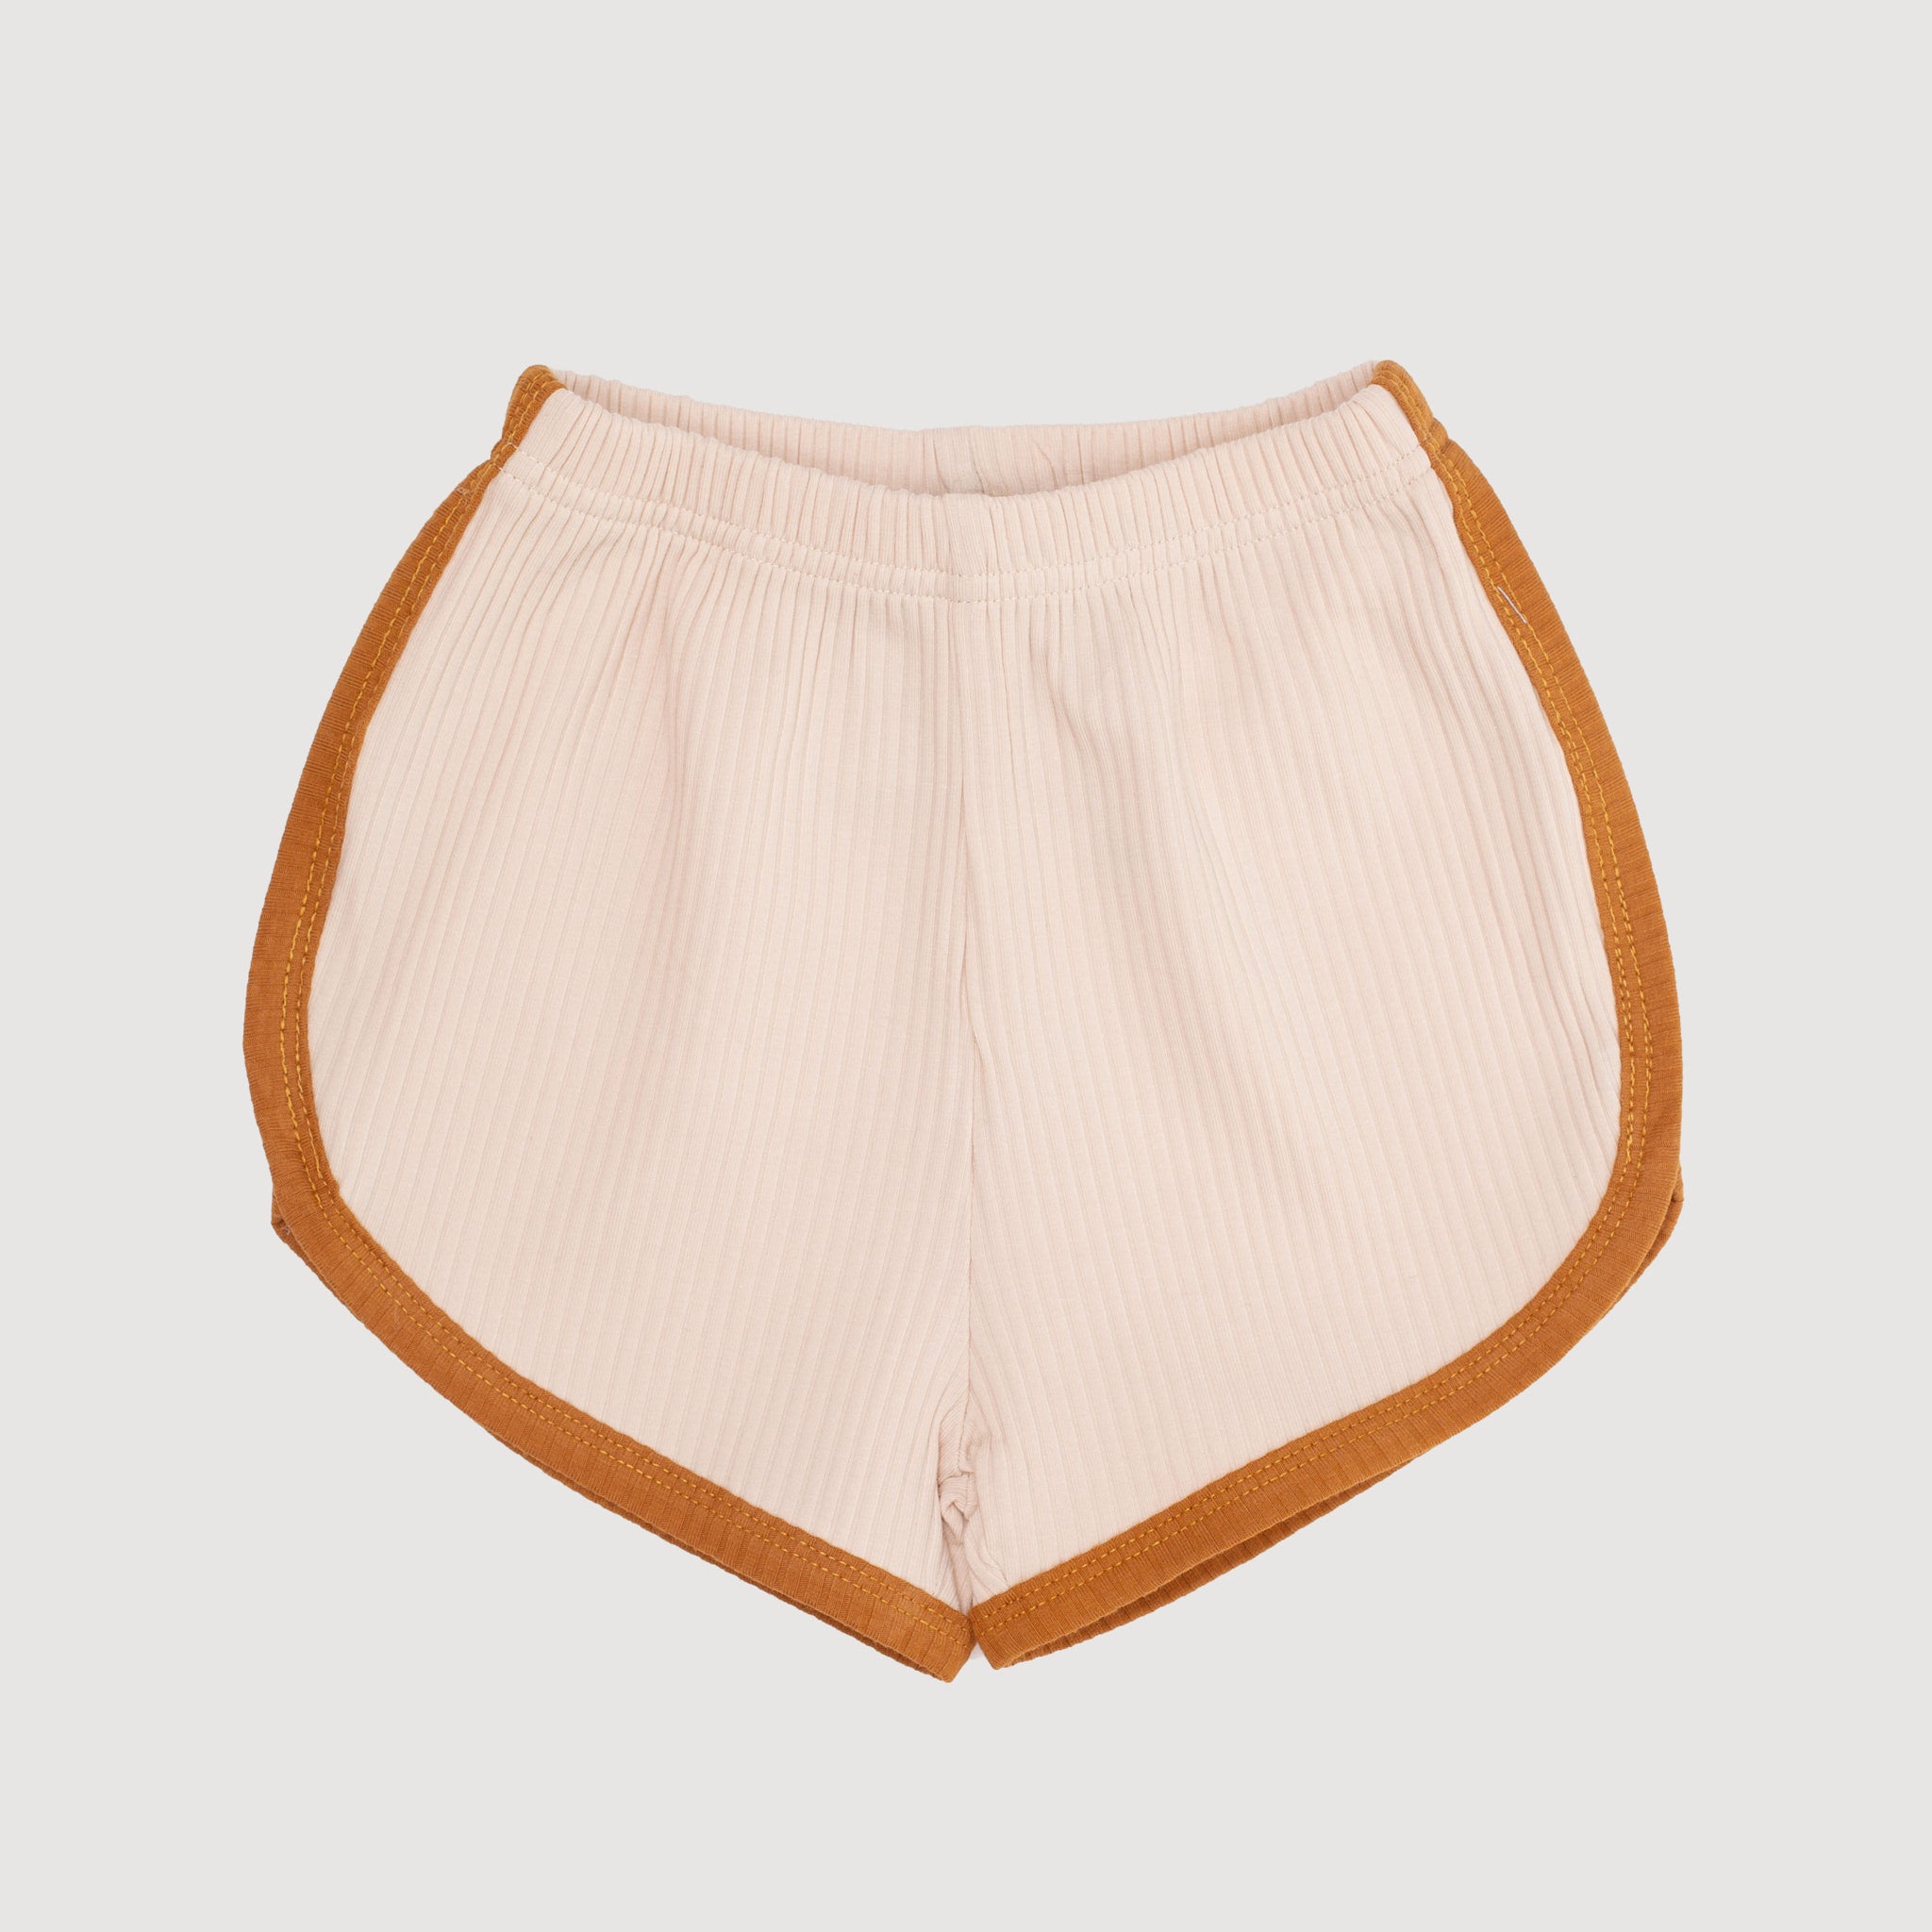 Retro Ribbed Shorts - Oatmeal with Mustard Binds bel & bow